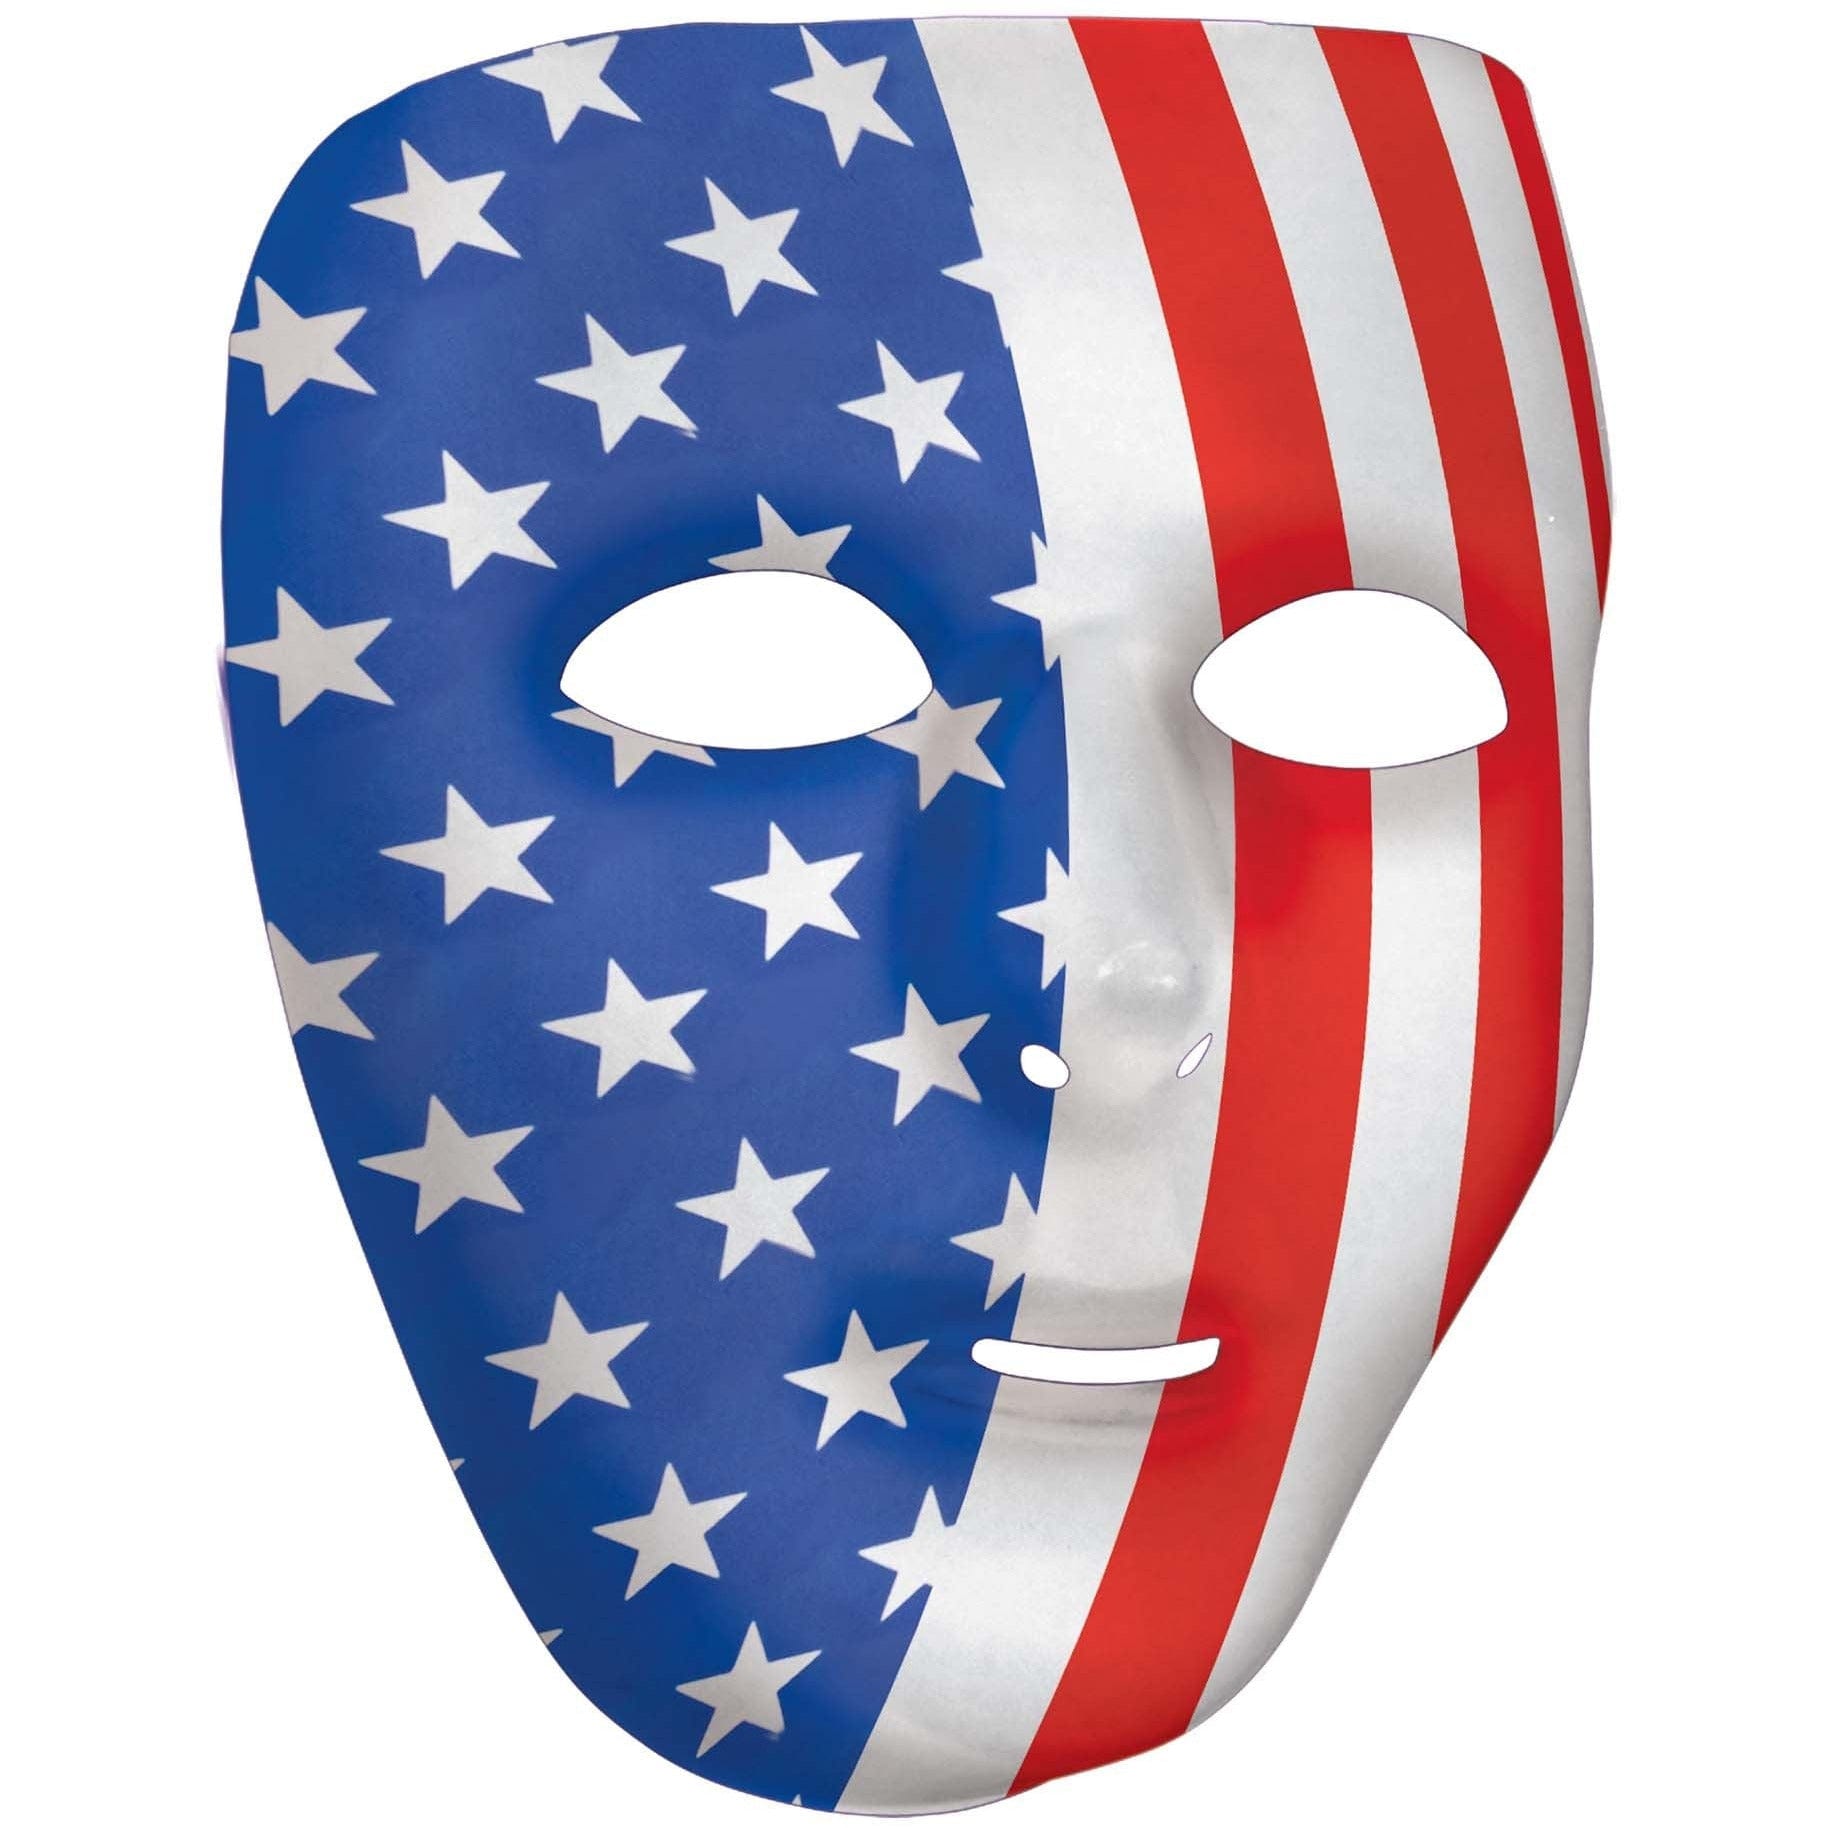 Amscan COSTUMES: MASKS Red, White And Blue Full Face Mask